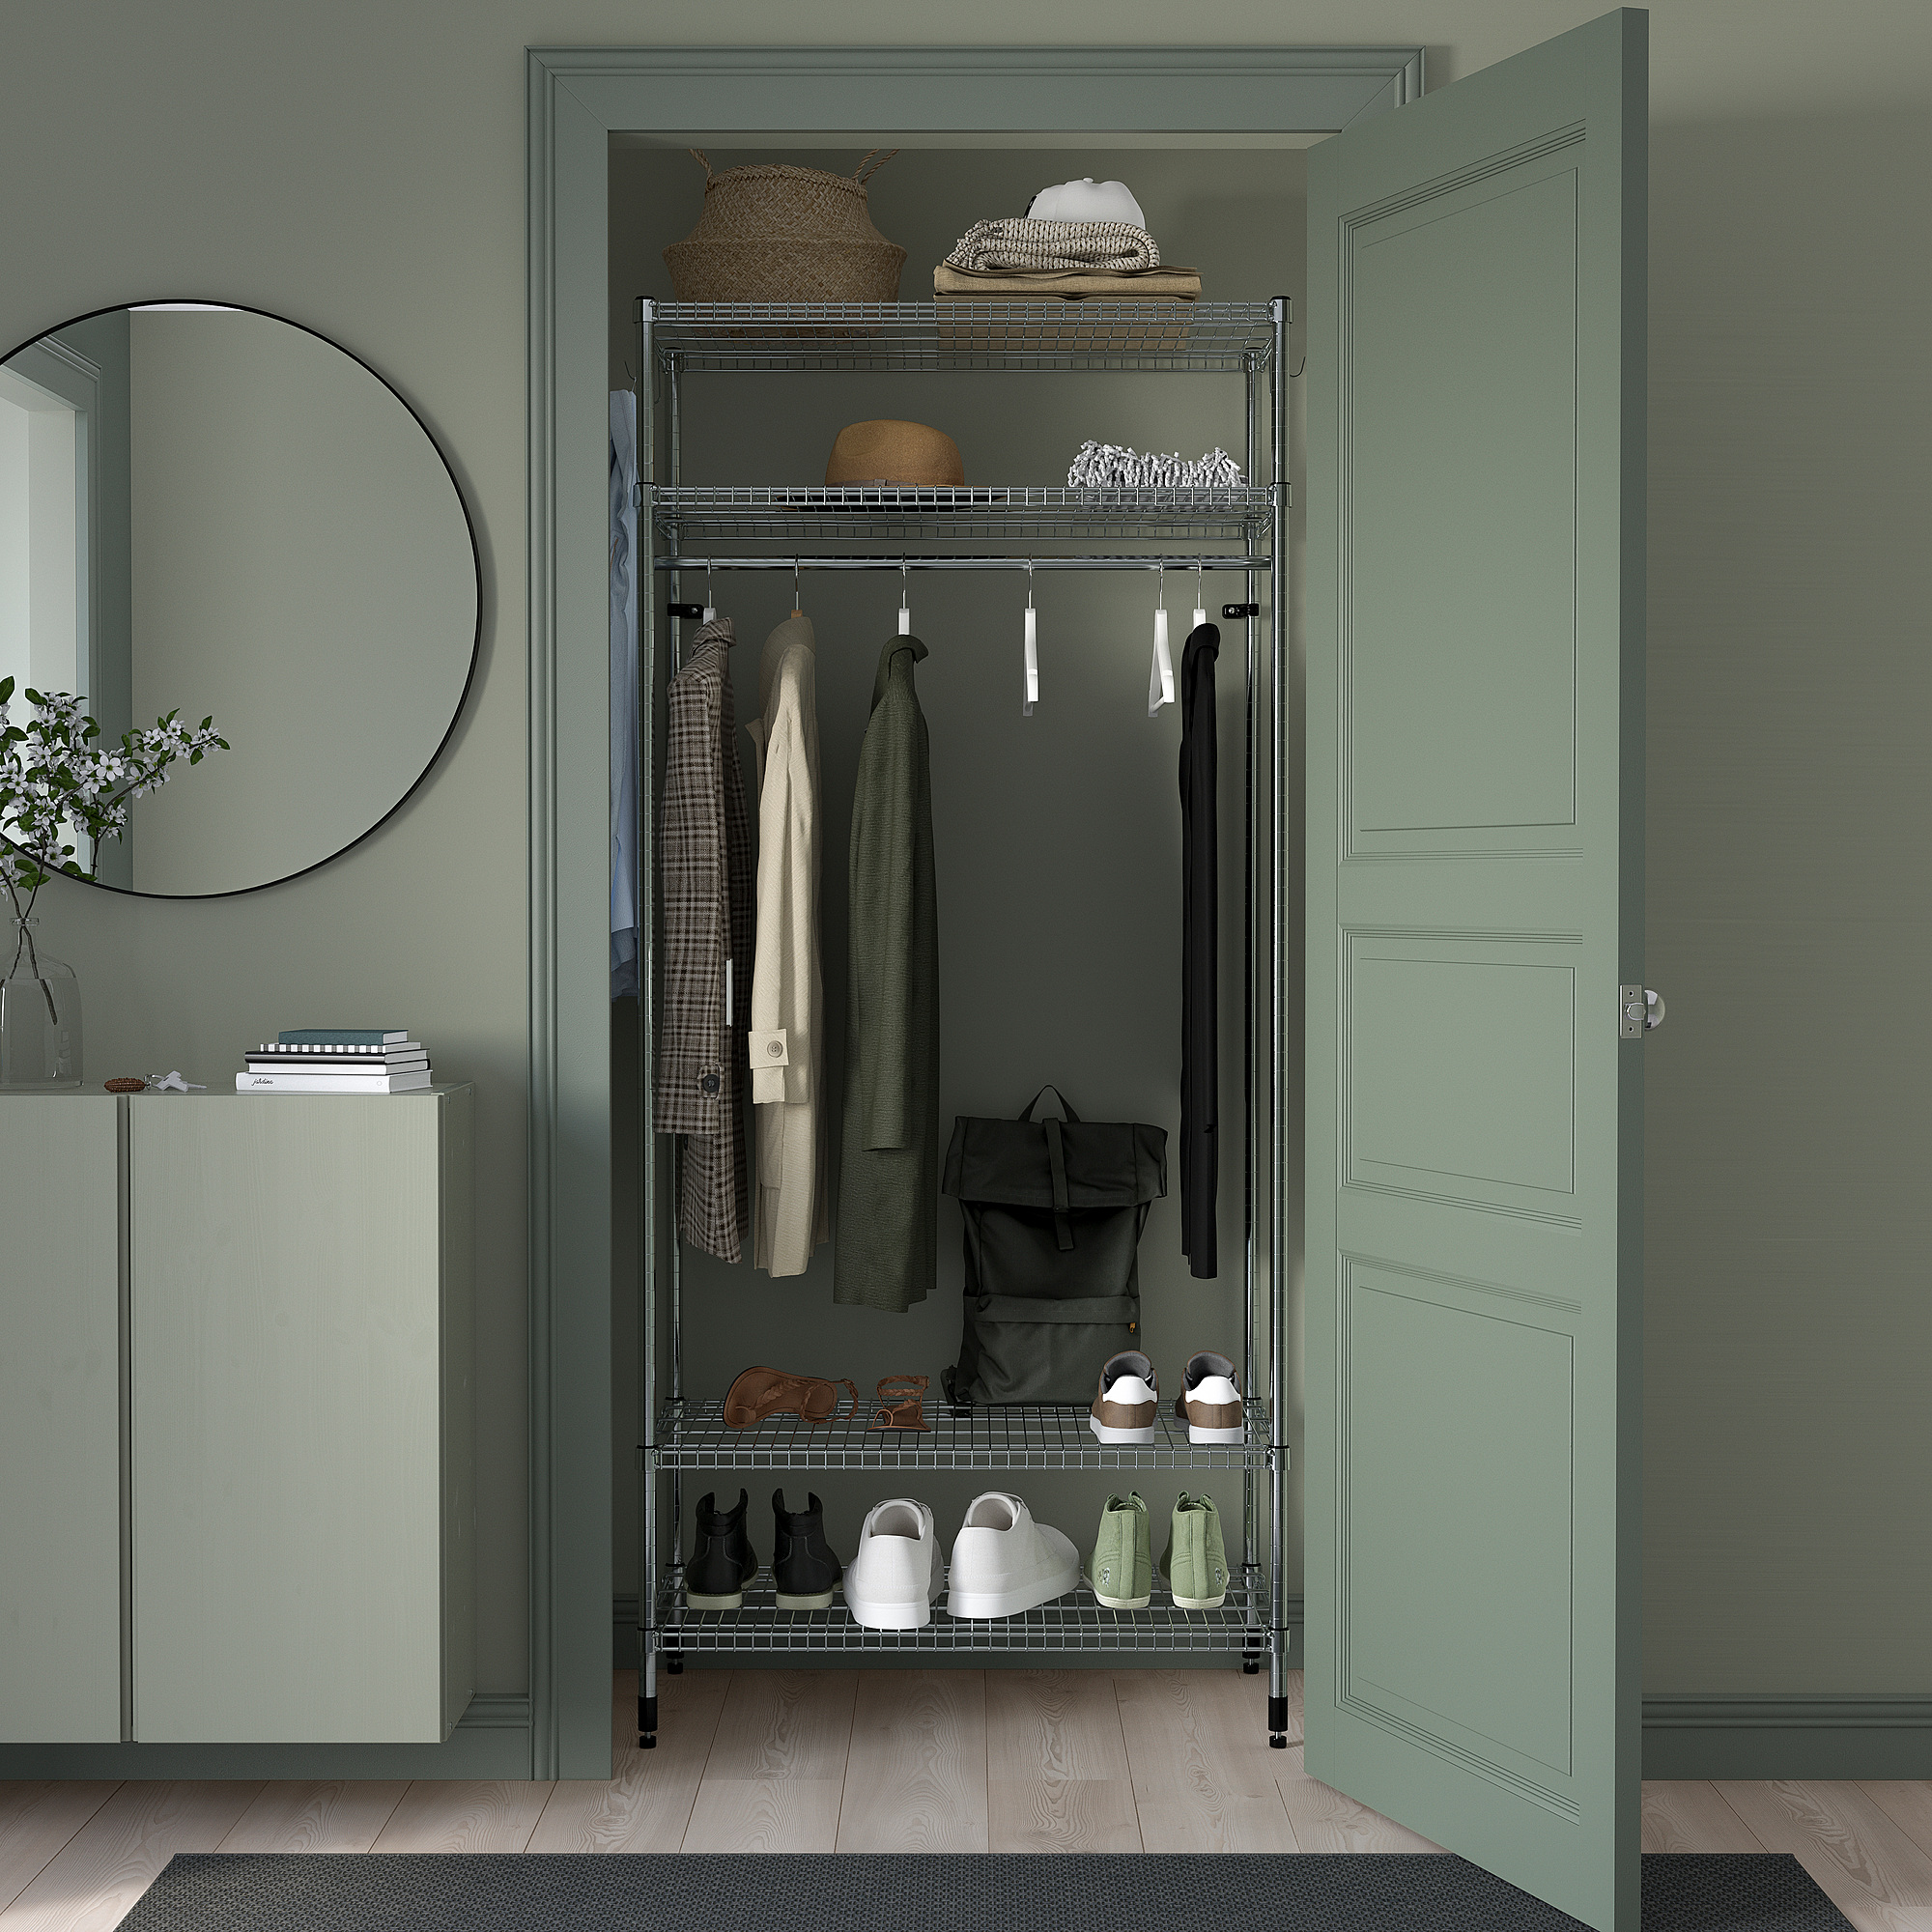 OMAR shelving unit with clothes rail